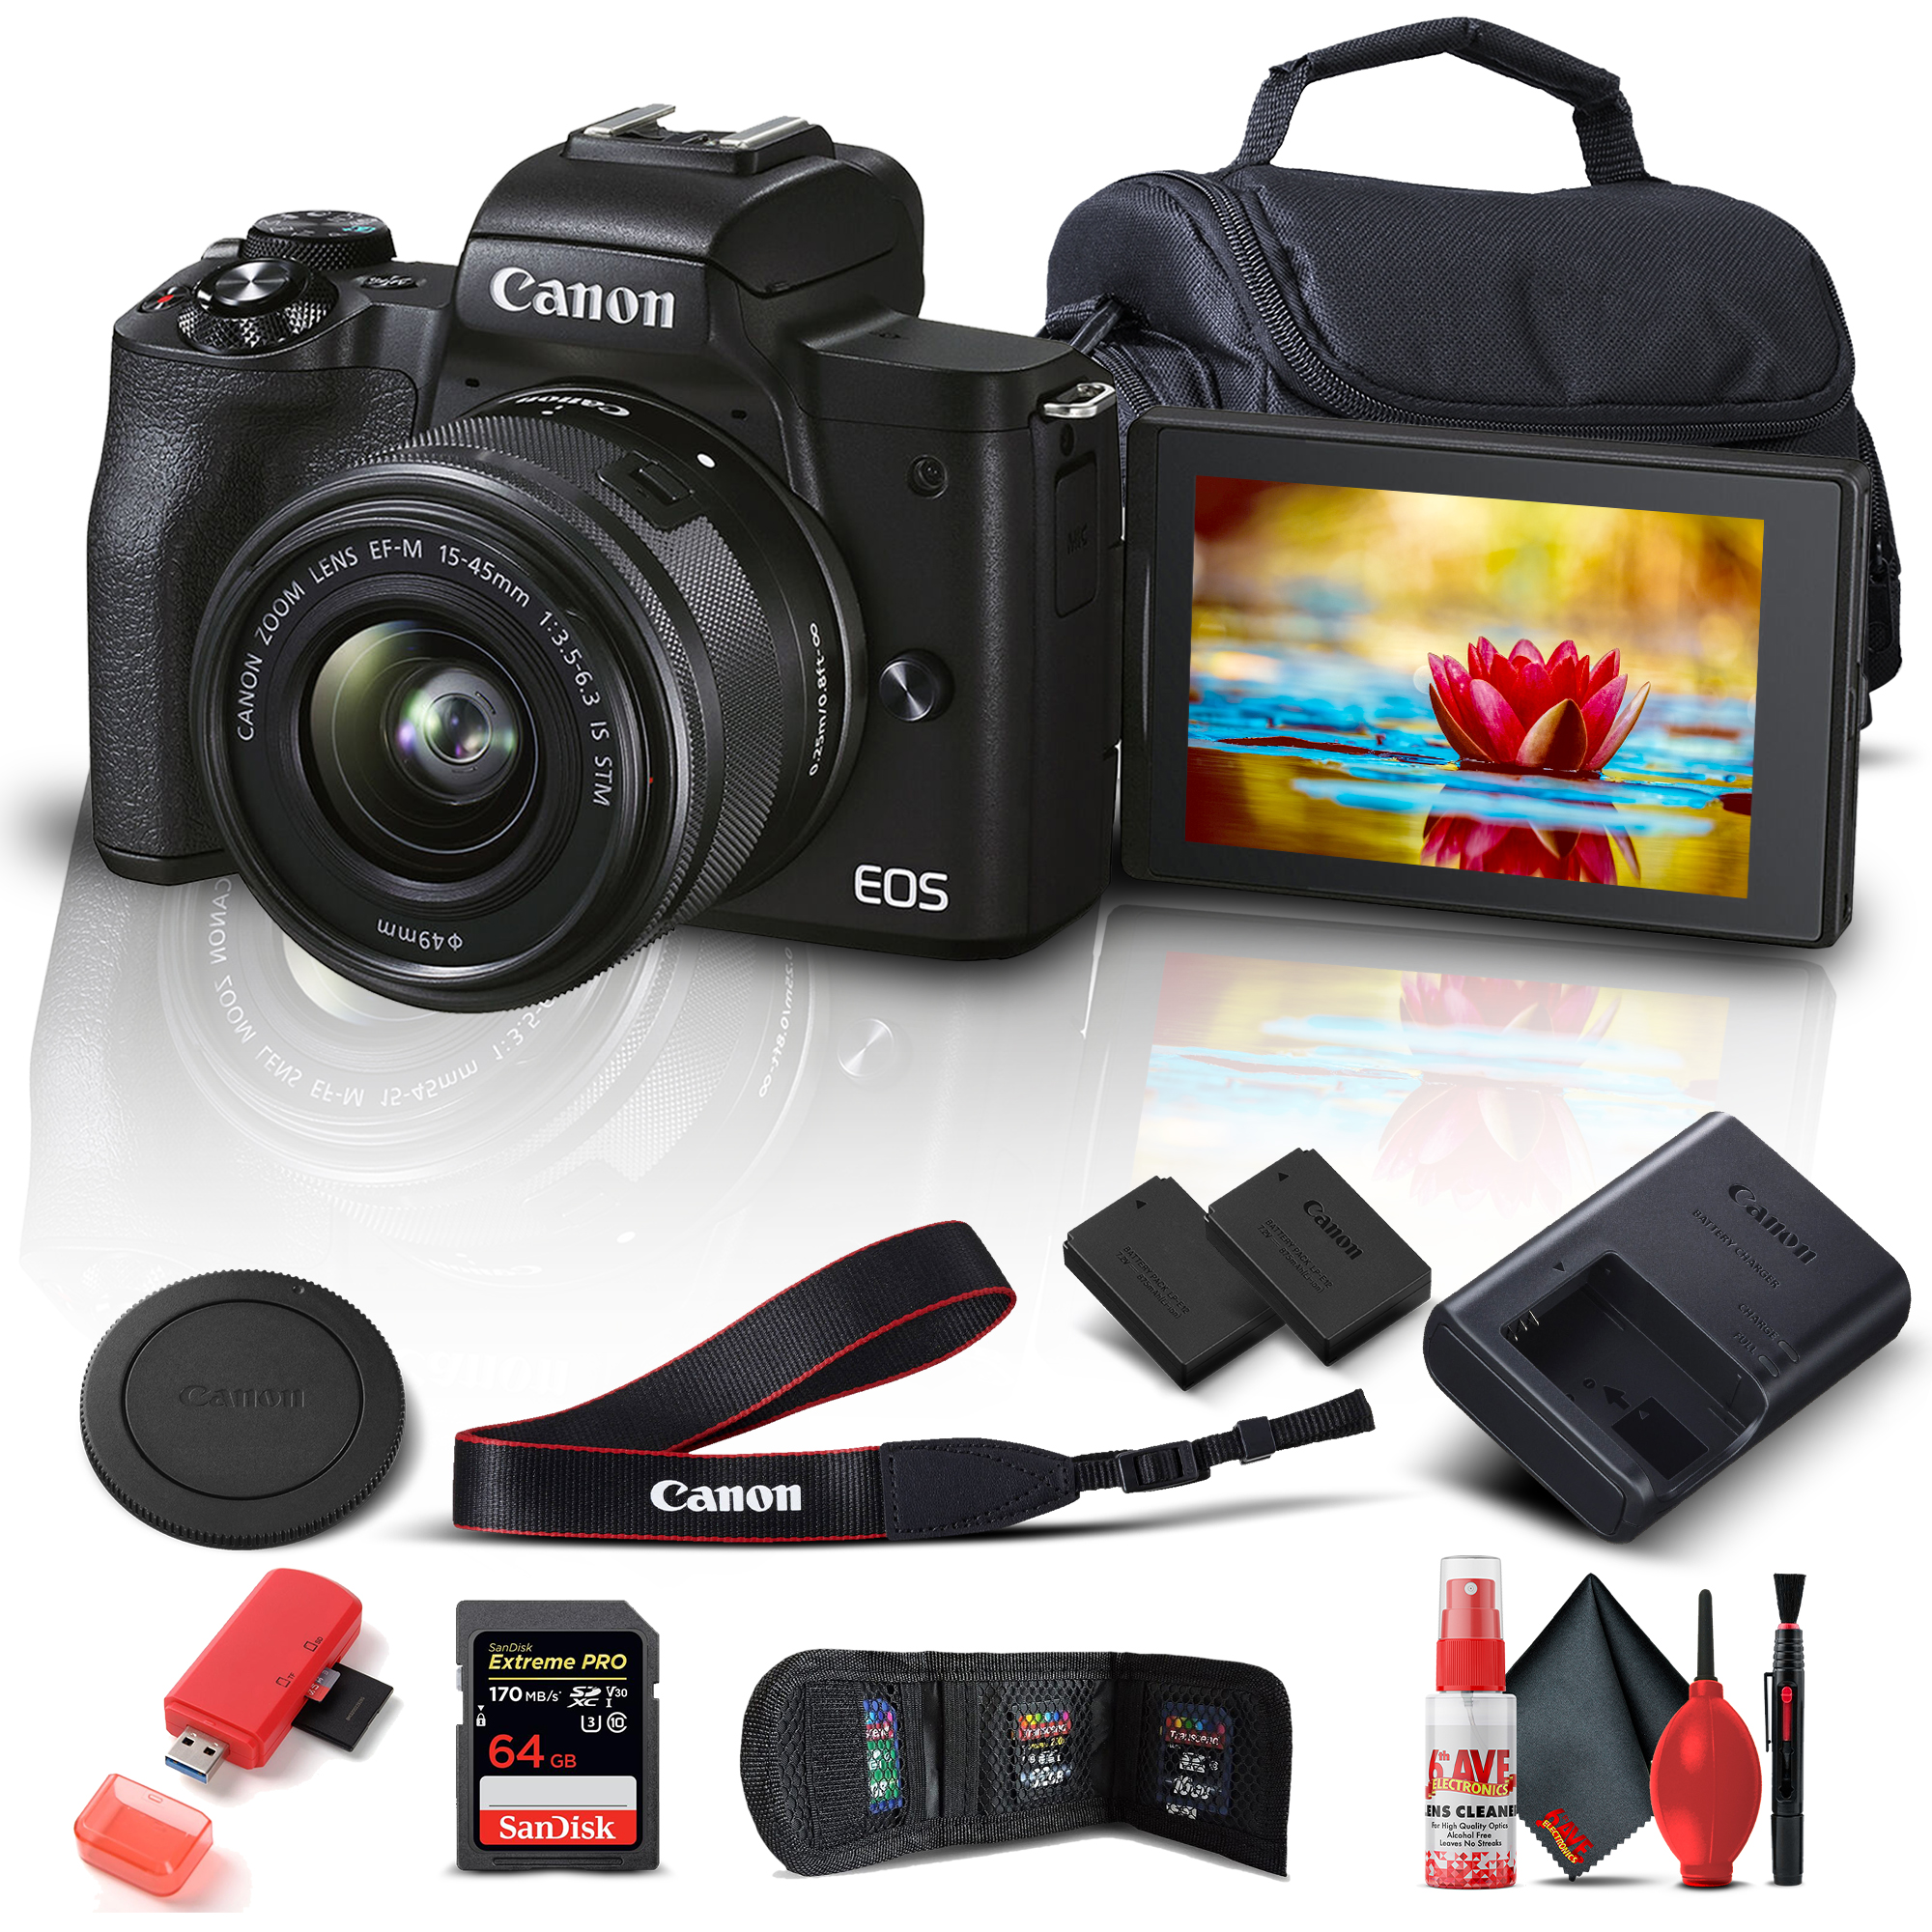 Canon EOS M50 Mark II Mirrorless Digital Camera with 15-45mm Lens (Black) (4728C006) + 64GB Extreme Pro Card + Extra LPE12 Battery + Case + Card Reader + Deluxe Cleaning Set + Memory  Wallet + More - image 1 of 6